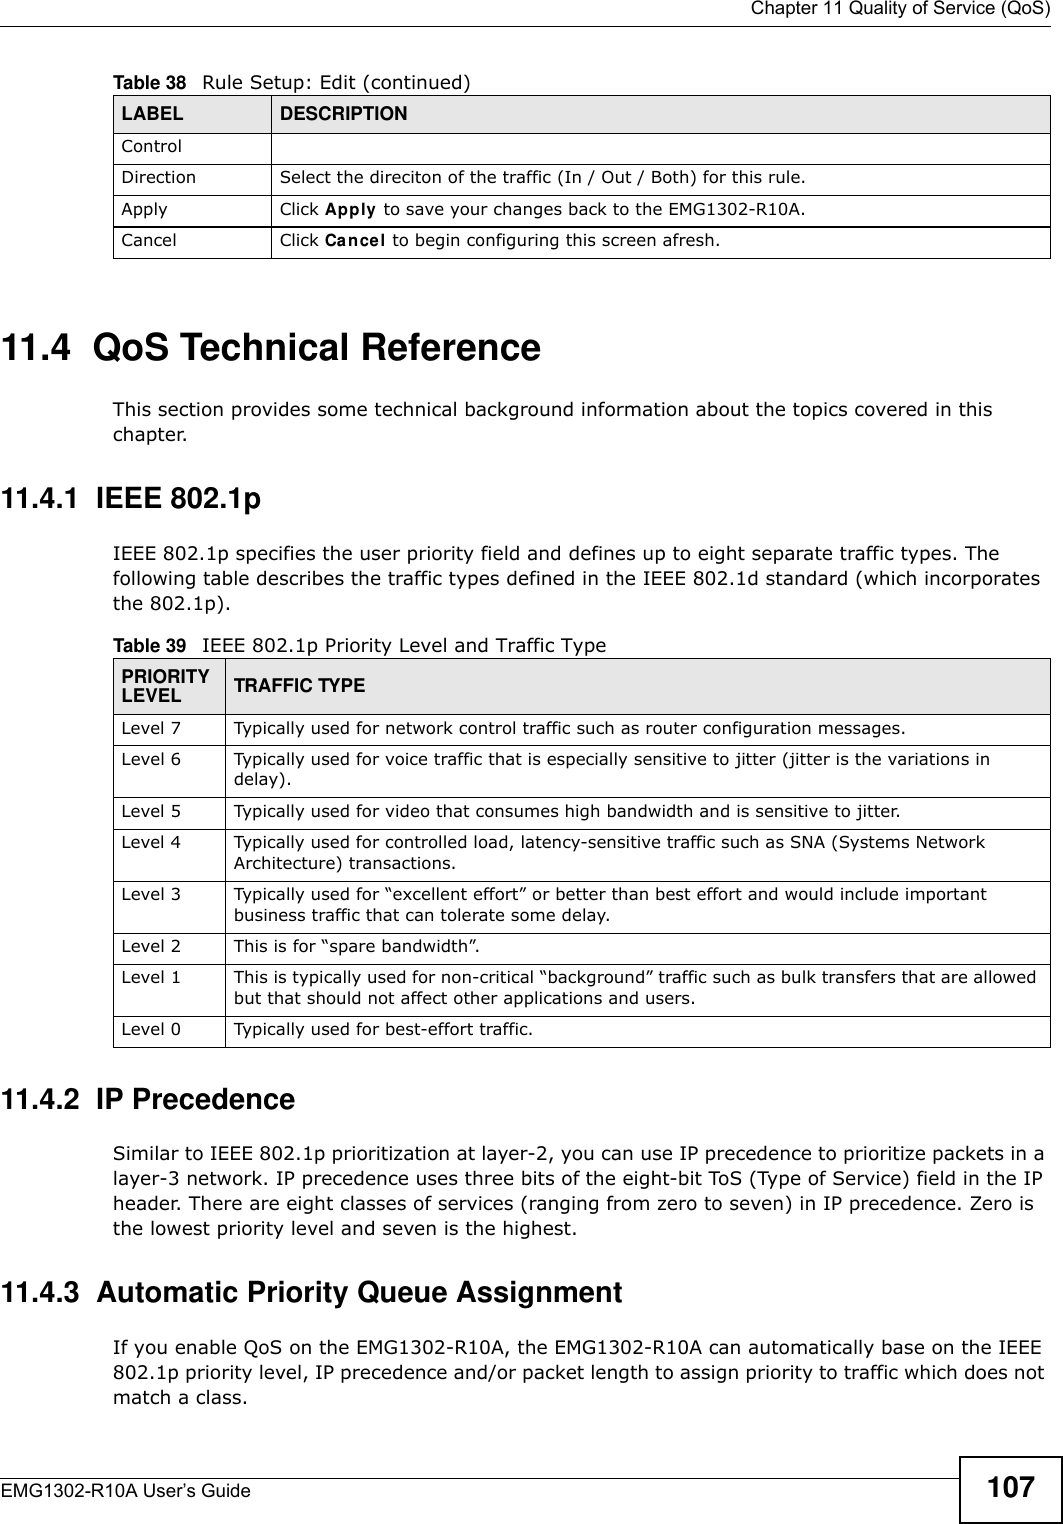  Chapter 11 Quality of Service (QoS)EMG1302-R10A User’s Guide 10711.4  QoS Technical ReferenceThis section provides some technical background information about the topics covered in this chapter.11.4.1  IEEE 802.1pIEEE 802.1p specifies the user priority field and defines up to eight separate traffic types. The following table describes the traffic types defined in the IEEE 802.1d standard (which incorporates the 802.1p). 11.4.2  IP PrecedenceSimilar to IEEE 802.1p prioritization at layer-2, you can use IP precedence to prioritize packets in a layer-3 network. IP precedence uses three bits of the eight-bit ToS (Type of Service) field in the IP header. There are eight classes of services (ranging from zero to seven) in IP precedence. Zero is the lowest priority level and seven is the highest.11.4.3  Automatic Priority Queue AssignmentIf you enable QoS on the EMG1302-R10A, the EMG1302-R10A can automatically base on the IEEE 802.1p priority level, IP precedence and/or packet length to assign priority to traffic which does not match a class.ControlDirection Select the direciton of the traffic (In / Out / Both) for this rule. Apply Click Apply  to save your changes back to the EMG1302-R10A.Cancel Click Cancel to begin configuring this screen afresh.Table 38   Rule Setup: Edit (continued)LABEL DESCRIPTIONTable 39   IEEE 802.1p Priority Level and Traffic TypePRIORITY LEVEL TRAFFIC TYPELevel 7 Typically used for network control traffic such as router configuration messages.Level 6 Typically used for voice traffic that is especially sensitive to jitter (jitter is the variations in delay).Level 5 Typically used for video that consumes high bandwidth and is sensitive to jitter.Level 4 Typically used for controlled load, latency-sensitive traffic such as SNA (Systems Network Architecture) transactions.Level 3 Typically used for “excellent effort” or better than best effort and would include important business traffic that can tolerate some delay.Level 2 This is for “spare bandwidth”. Level 1 This is typically used for non-critical “background” traffic such as bulk transfers that are allowed but that should not affect other applications and users. Level 0 Typically used for best-effort traffic.